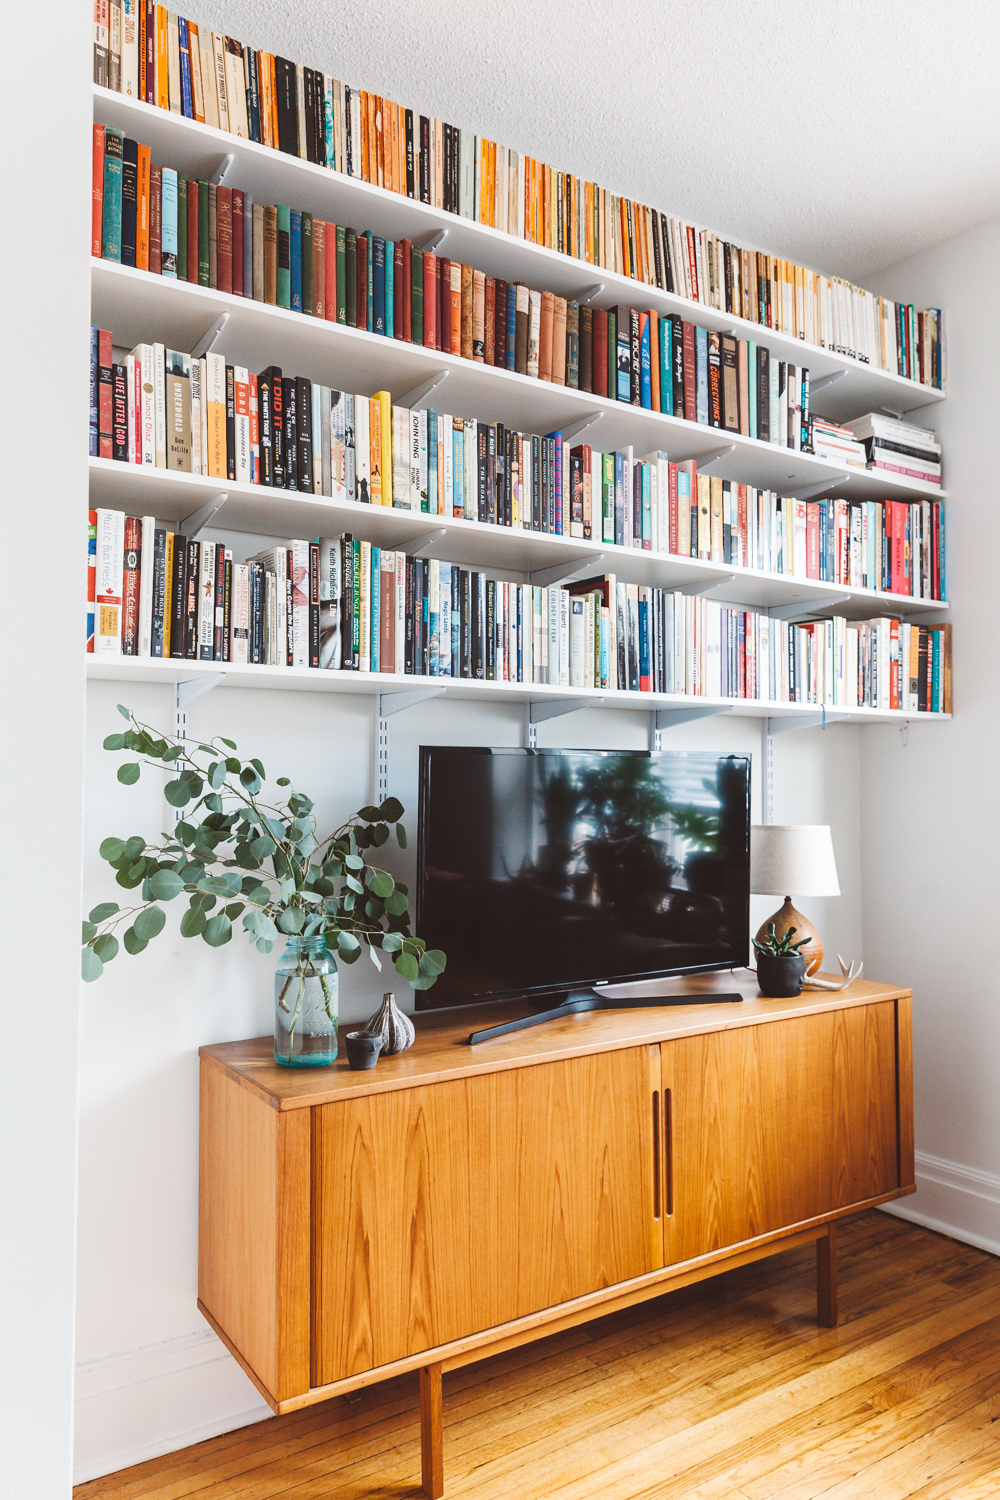 Shelves lined with books above TV